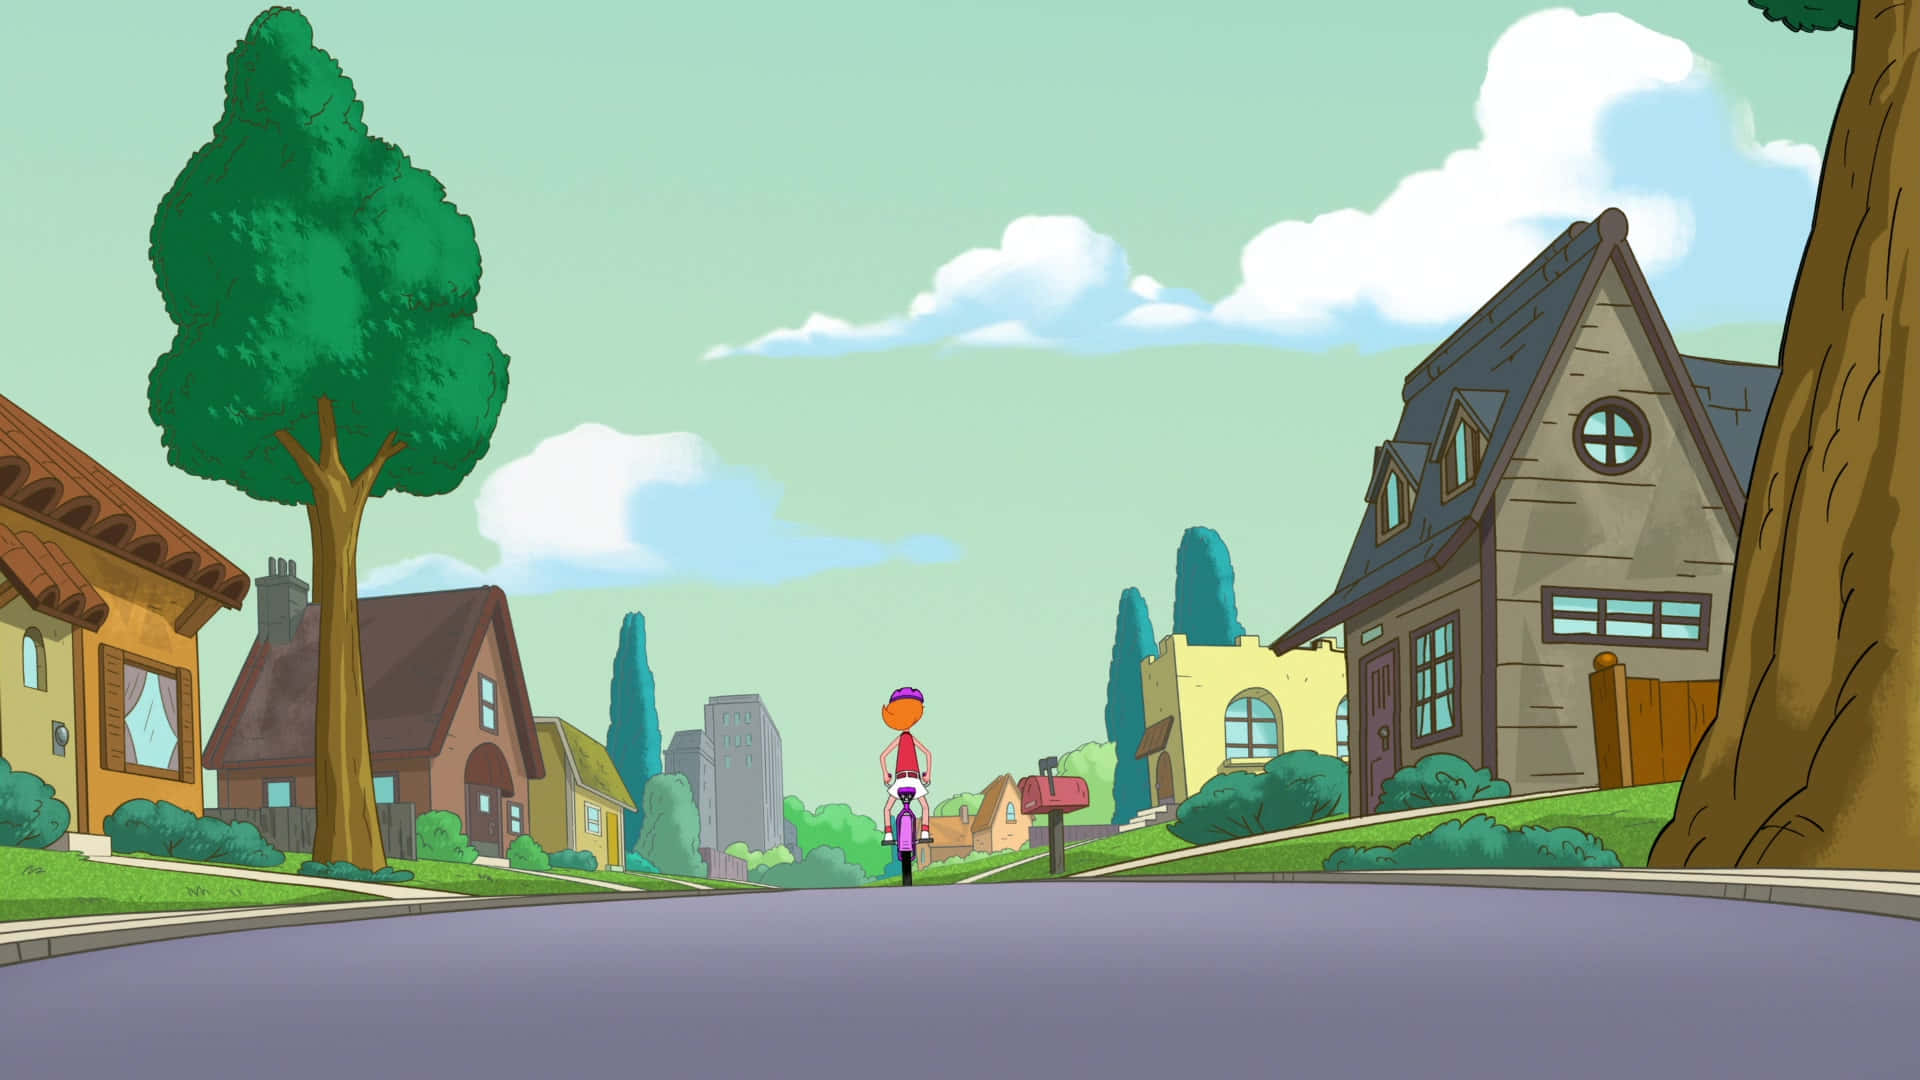 The Unforgettable Adventure of Phineas and Ferb